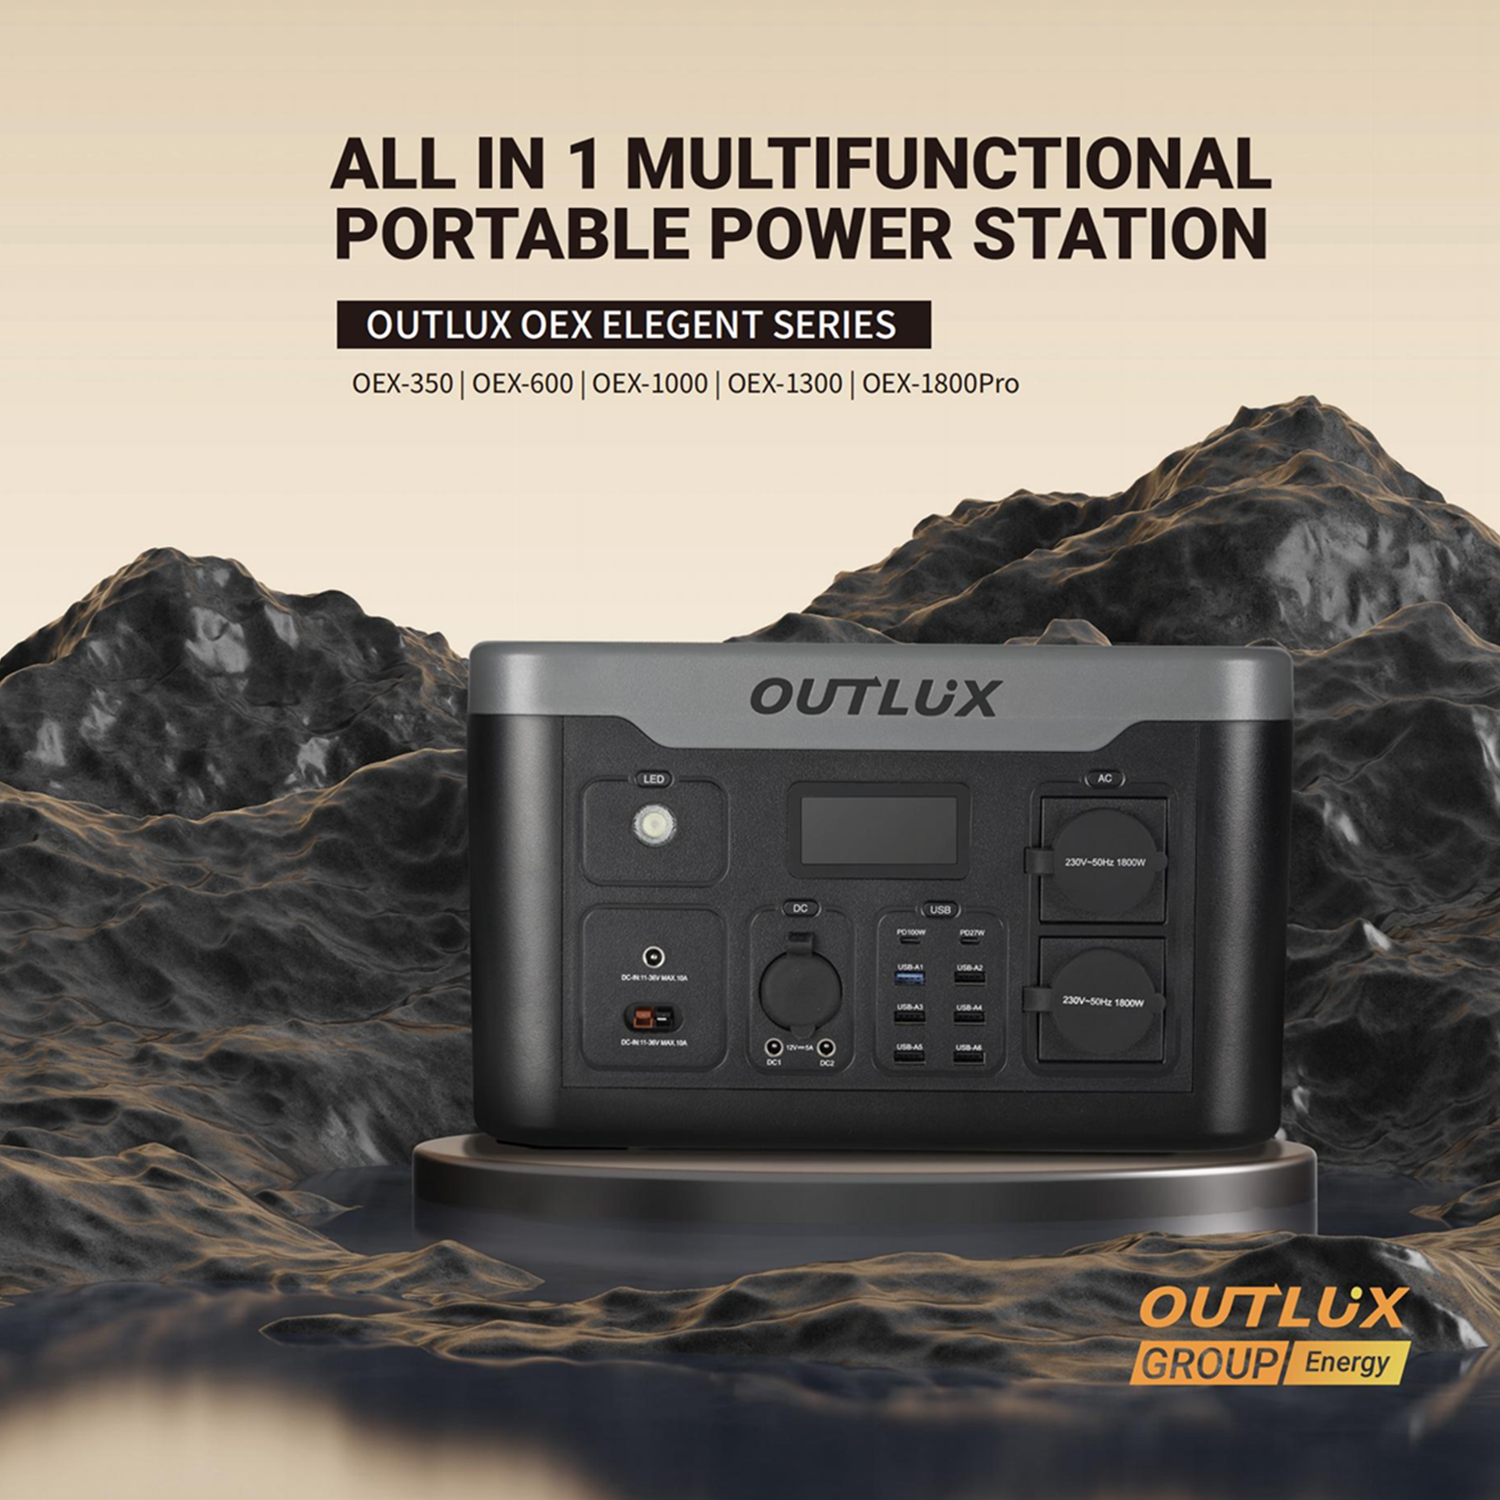 Outlux 1800w Portable Power Station-Multifunctional